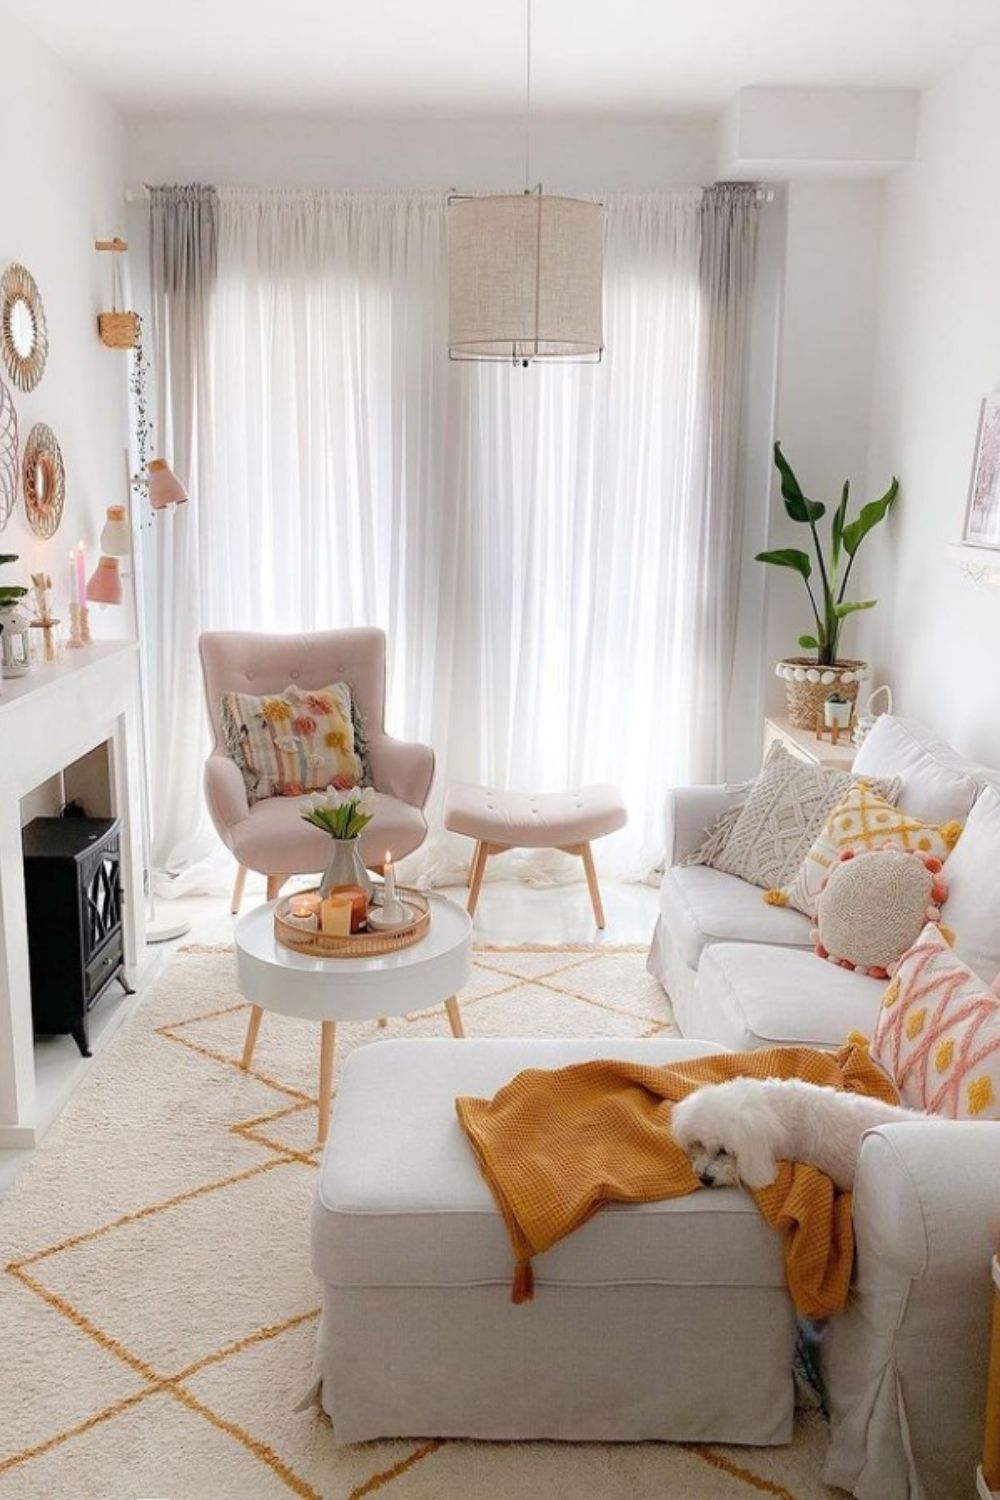 Home Decor Trends You'll See Everywhere